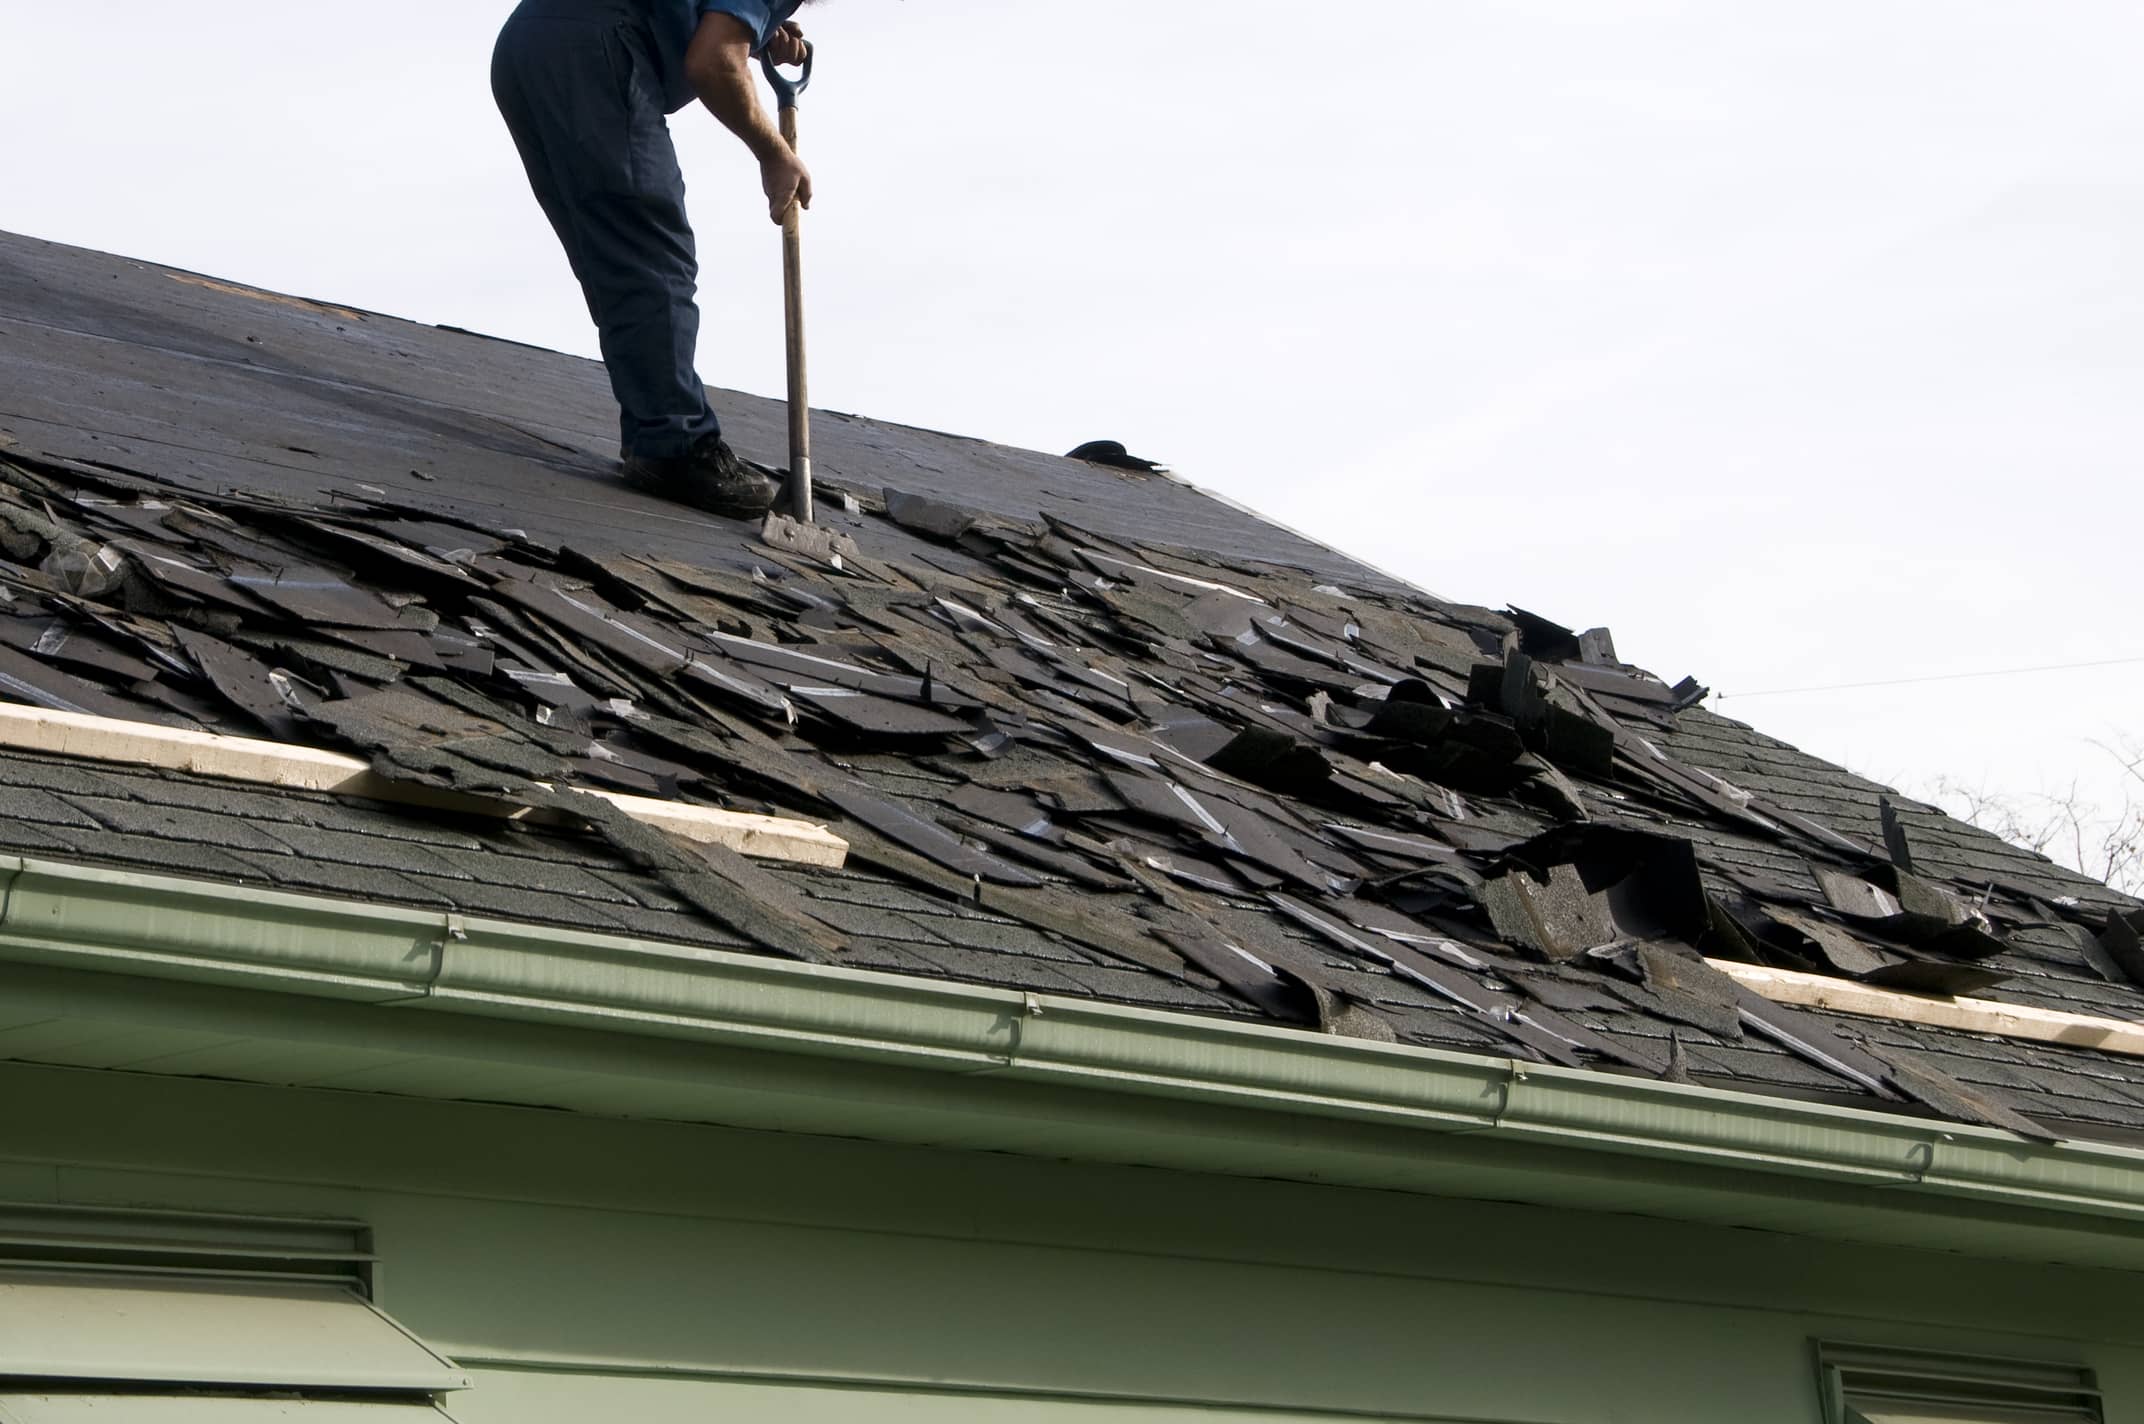 This is an image of a contractor preparing to replace a damaged roof.